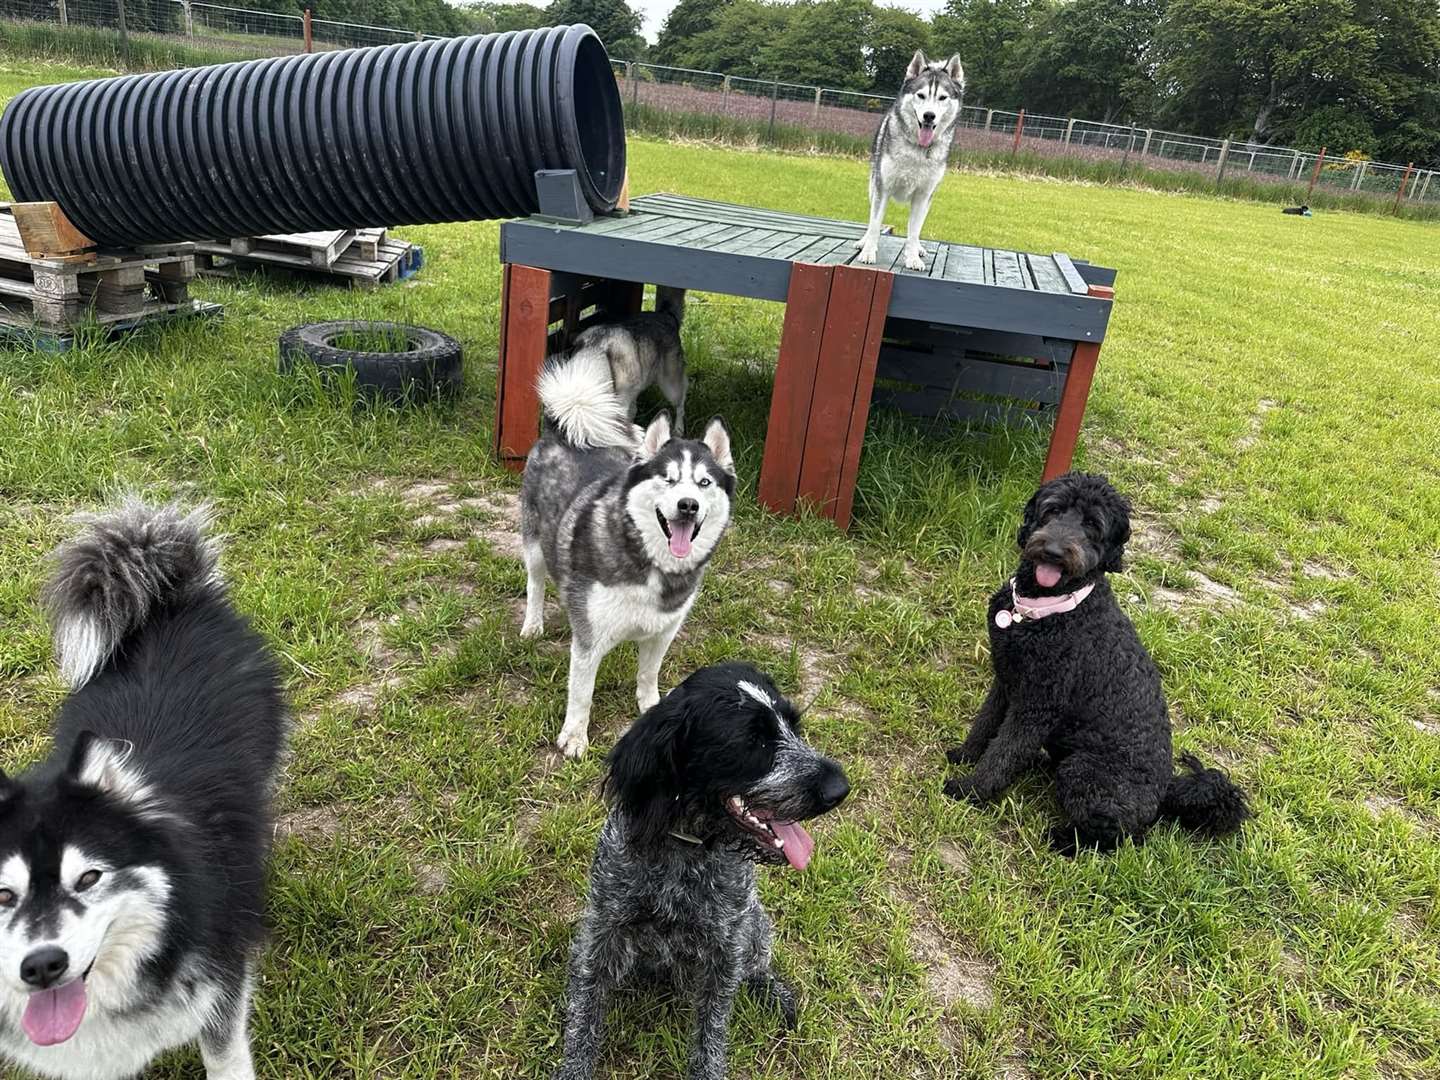 Everyone enjoying the new park. Pictures courtesy of: Paws N Play Adventure Park.